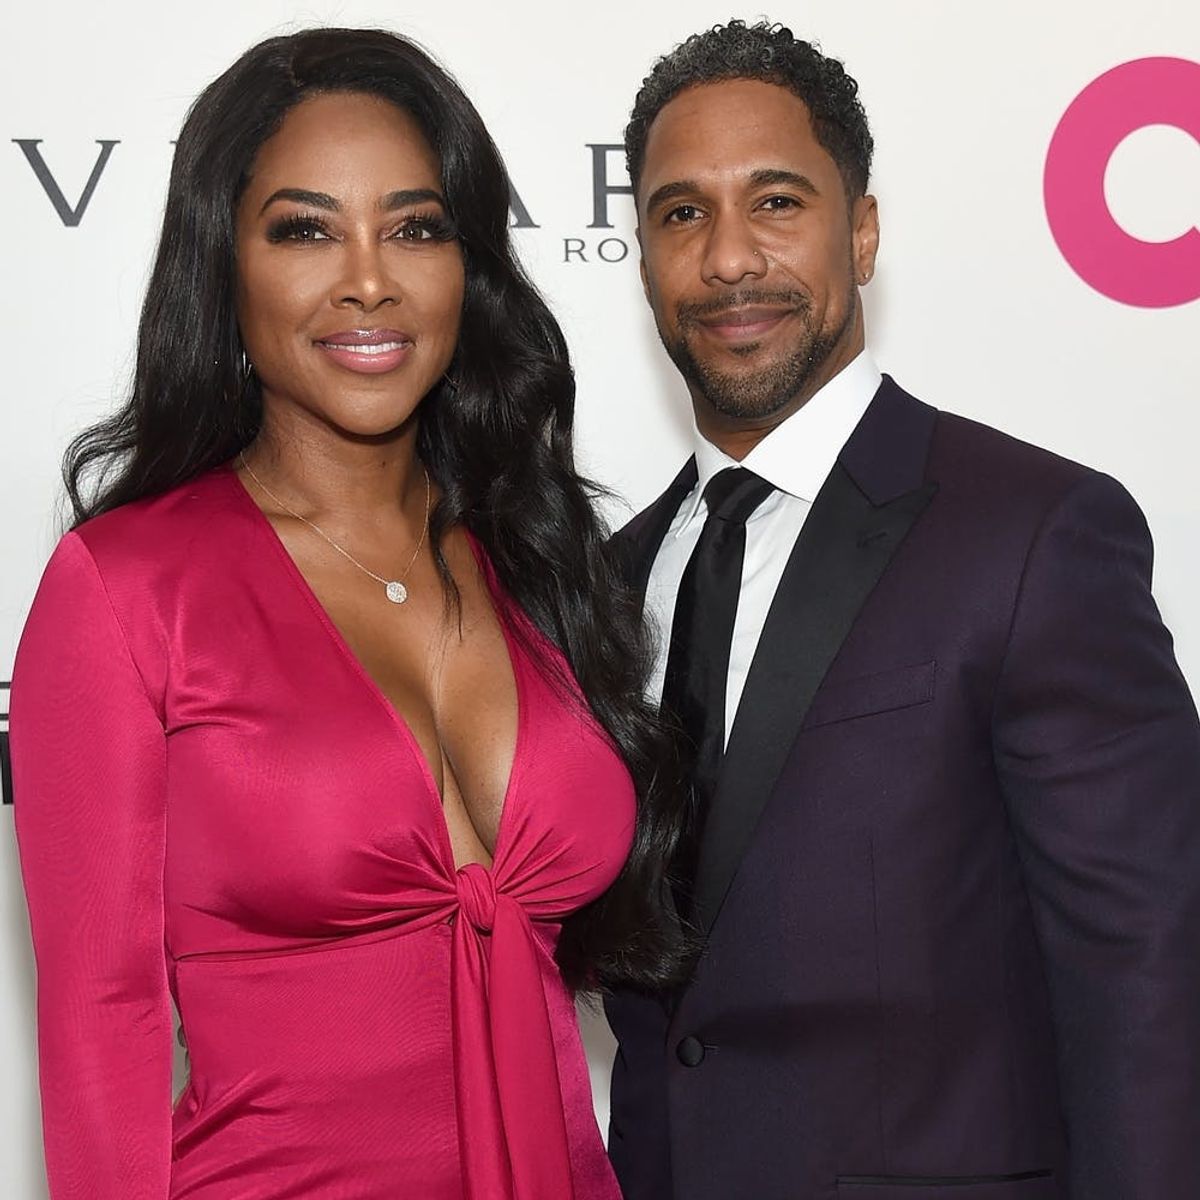 ‘RHOA’ Star Kenya Moore Is Expecting Her First Child With Husband Marc Daly!